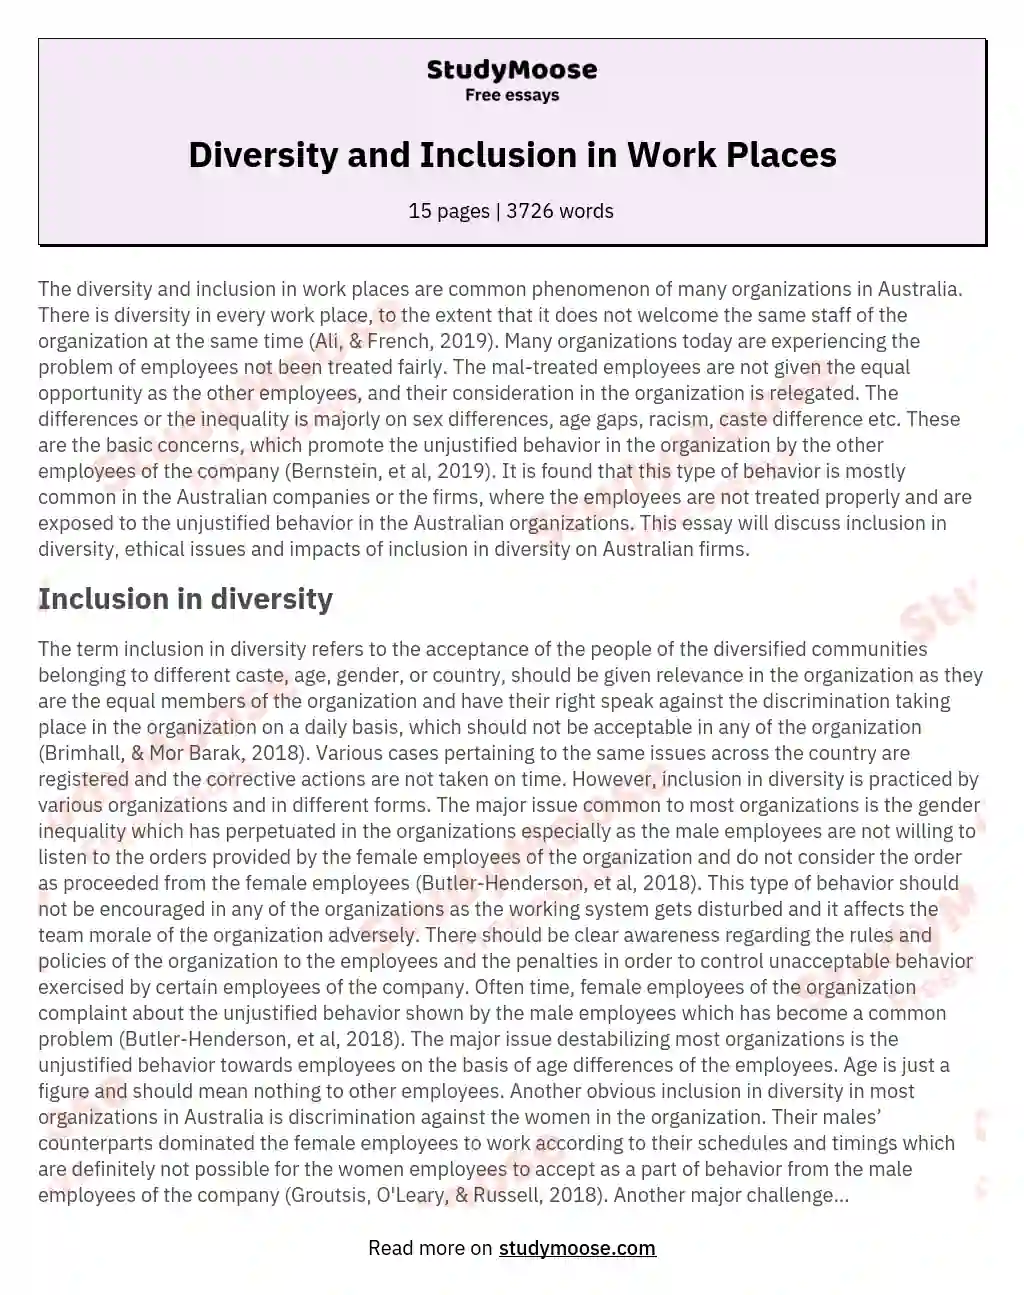 essay on diversity and inclusion in the workplace